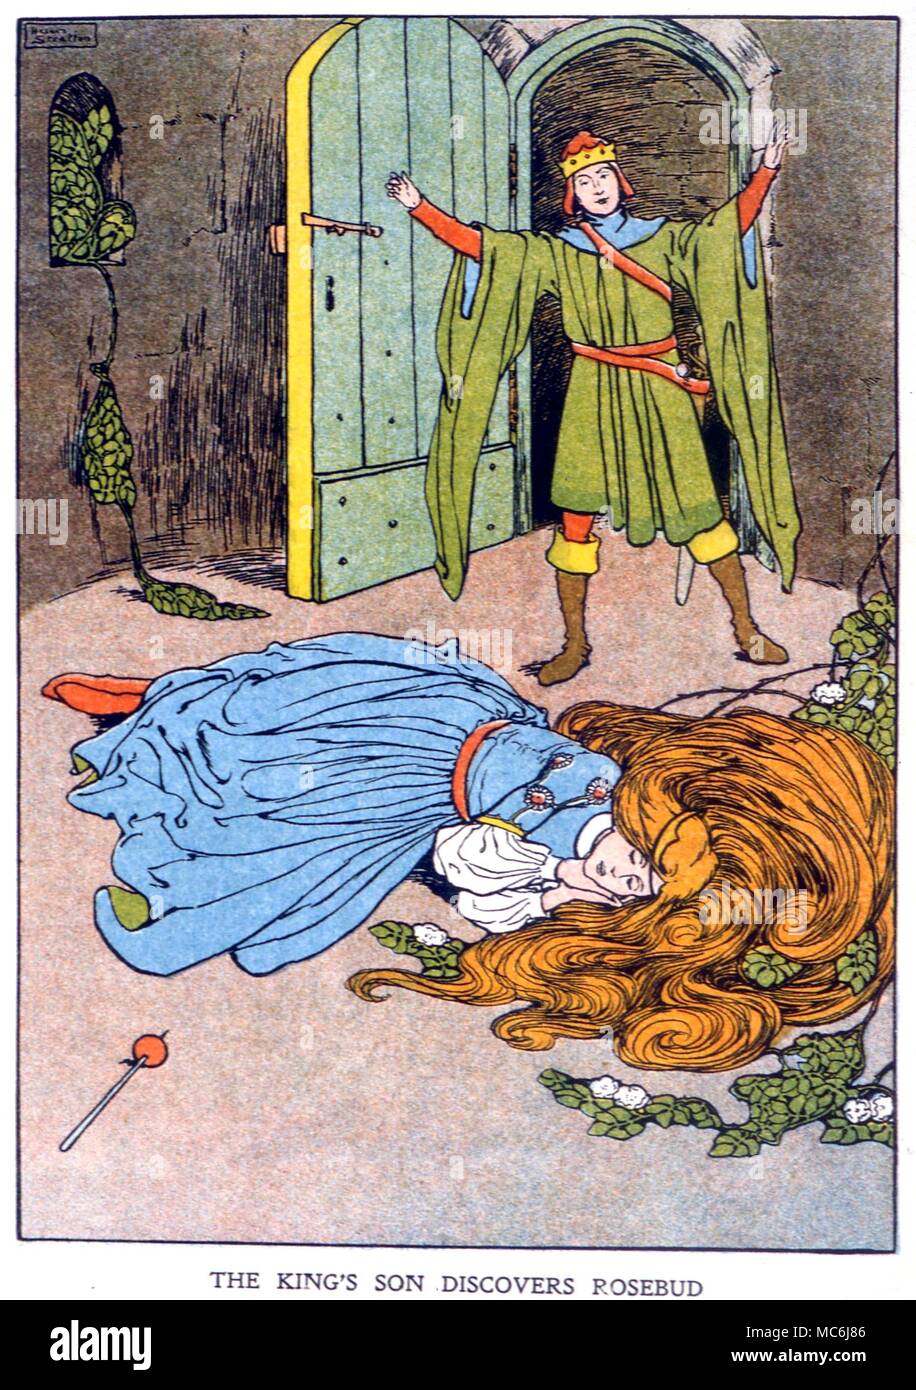 FAIRY STORIES - SLEEPING BEAUTY. The Prince discovers the sleeping Rosebud. From Cherryblossom and other stories from Grimm, 1909, illustrated by Helen Stratton Stock Photo